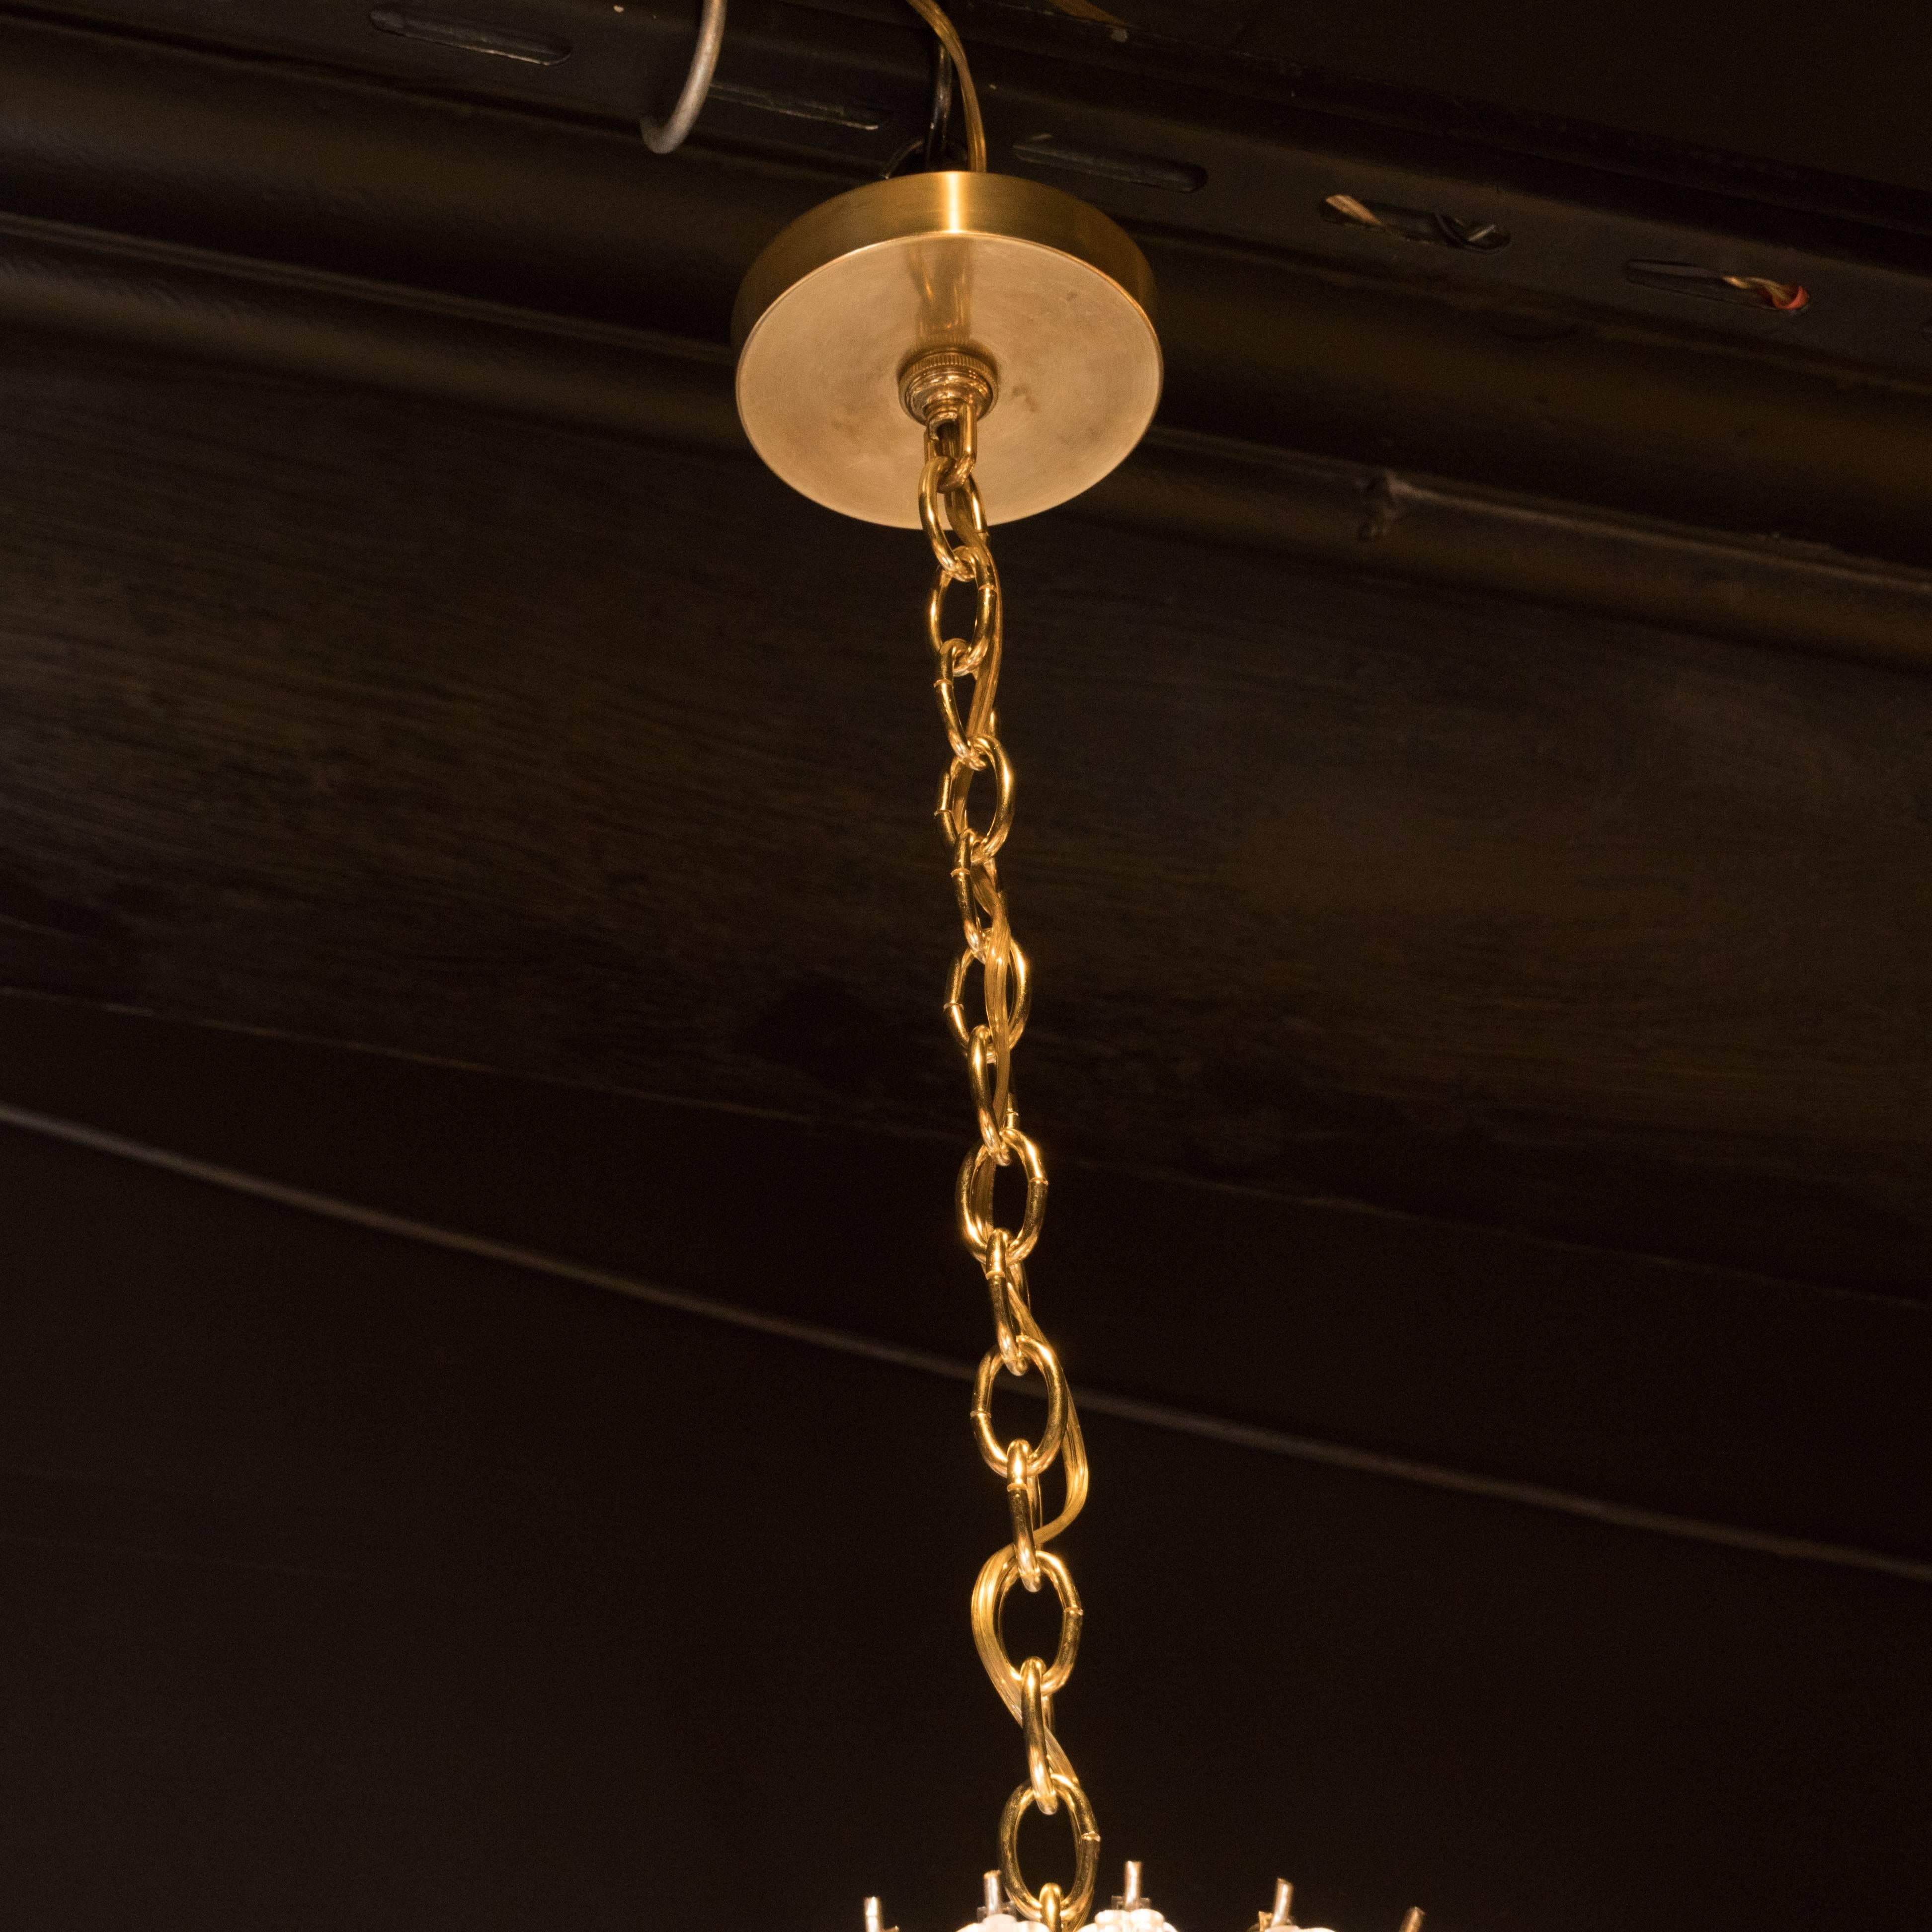 Italian Mid-Century Modern Three-Tier Cut Triedre Camer Glass and Brass Chandelier For Sale